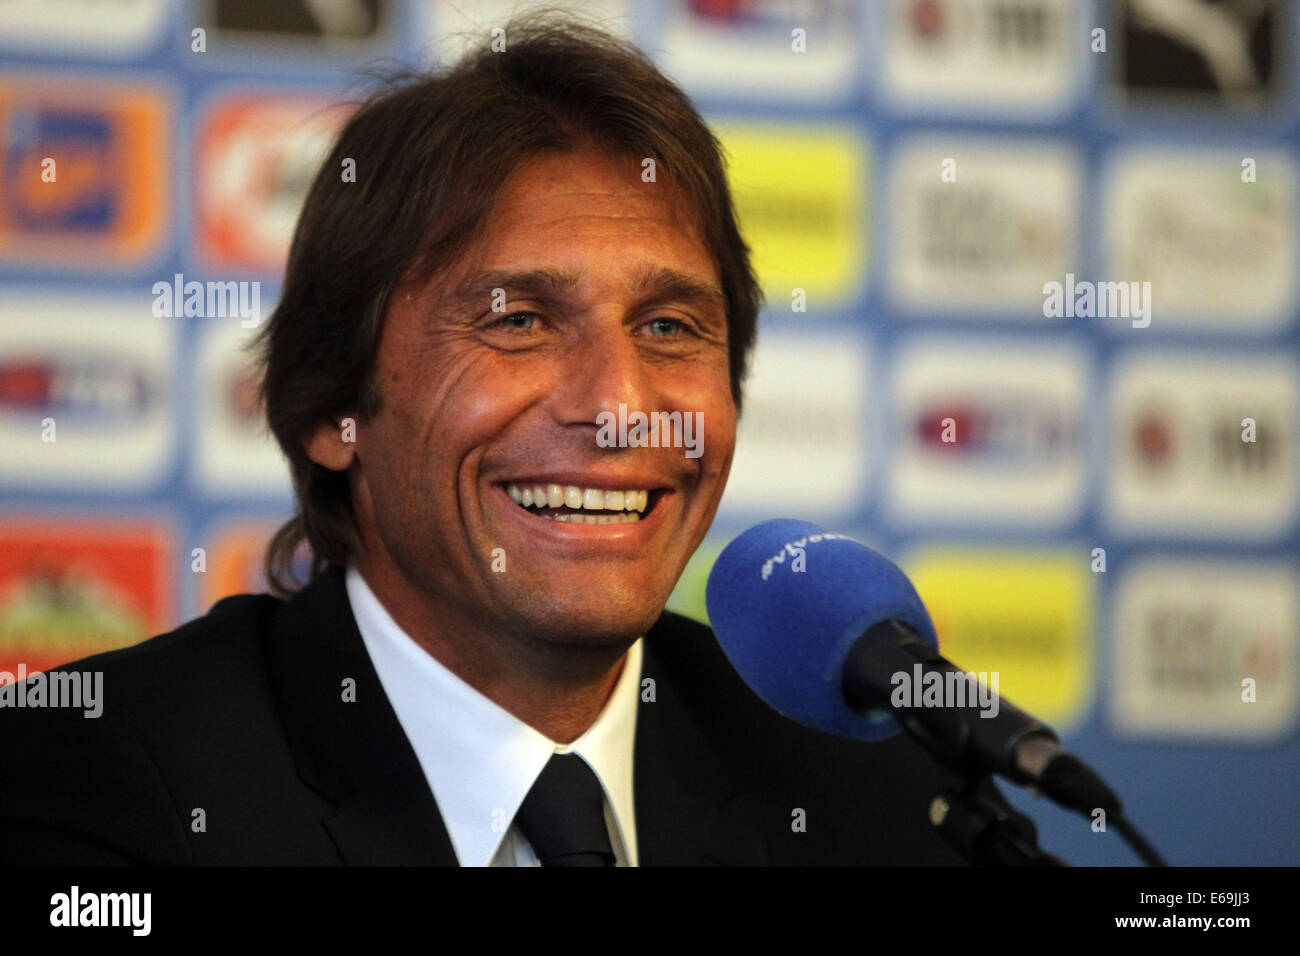 Rome, Italy. 19th August, 2014.  hotel parco dei principi Football / Soccer:  Antonio Conte is the new coach of the italian national soccer team, replaces Cesare Prandelli after the disastrous adventure to the world cup in brazil 2014, his salary is 4 milion euro years     (photo: Marco Iacobucci/Alamy live news) Stock Photo